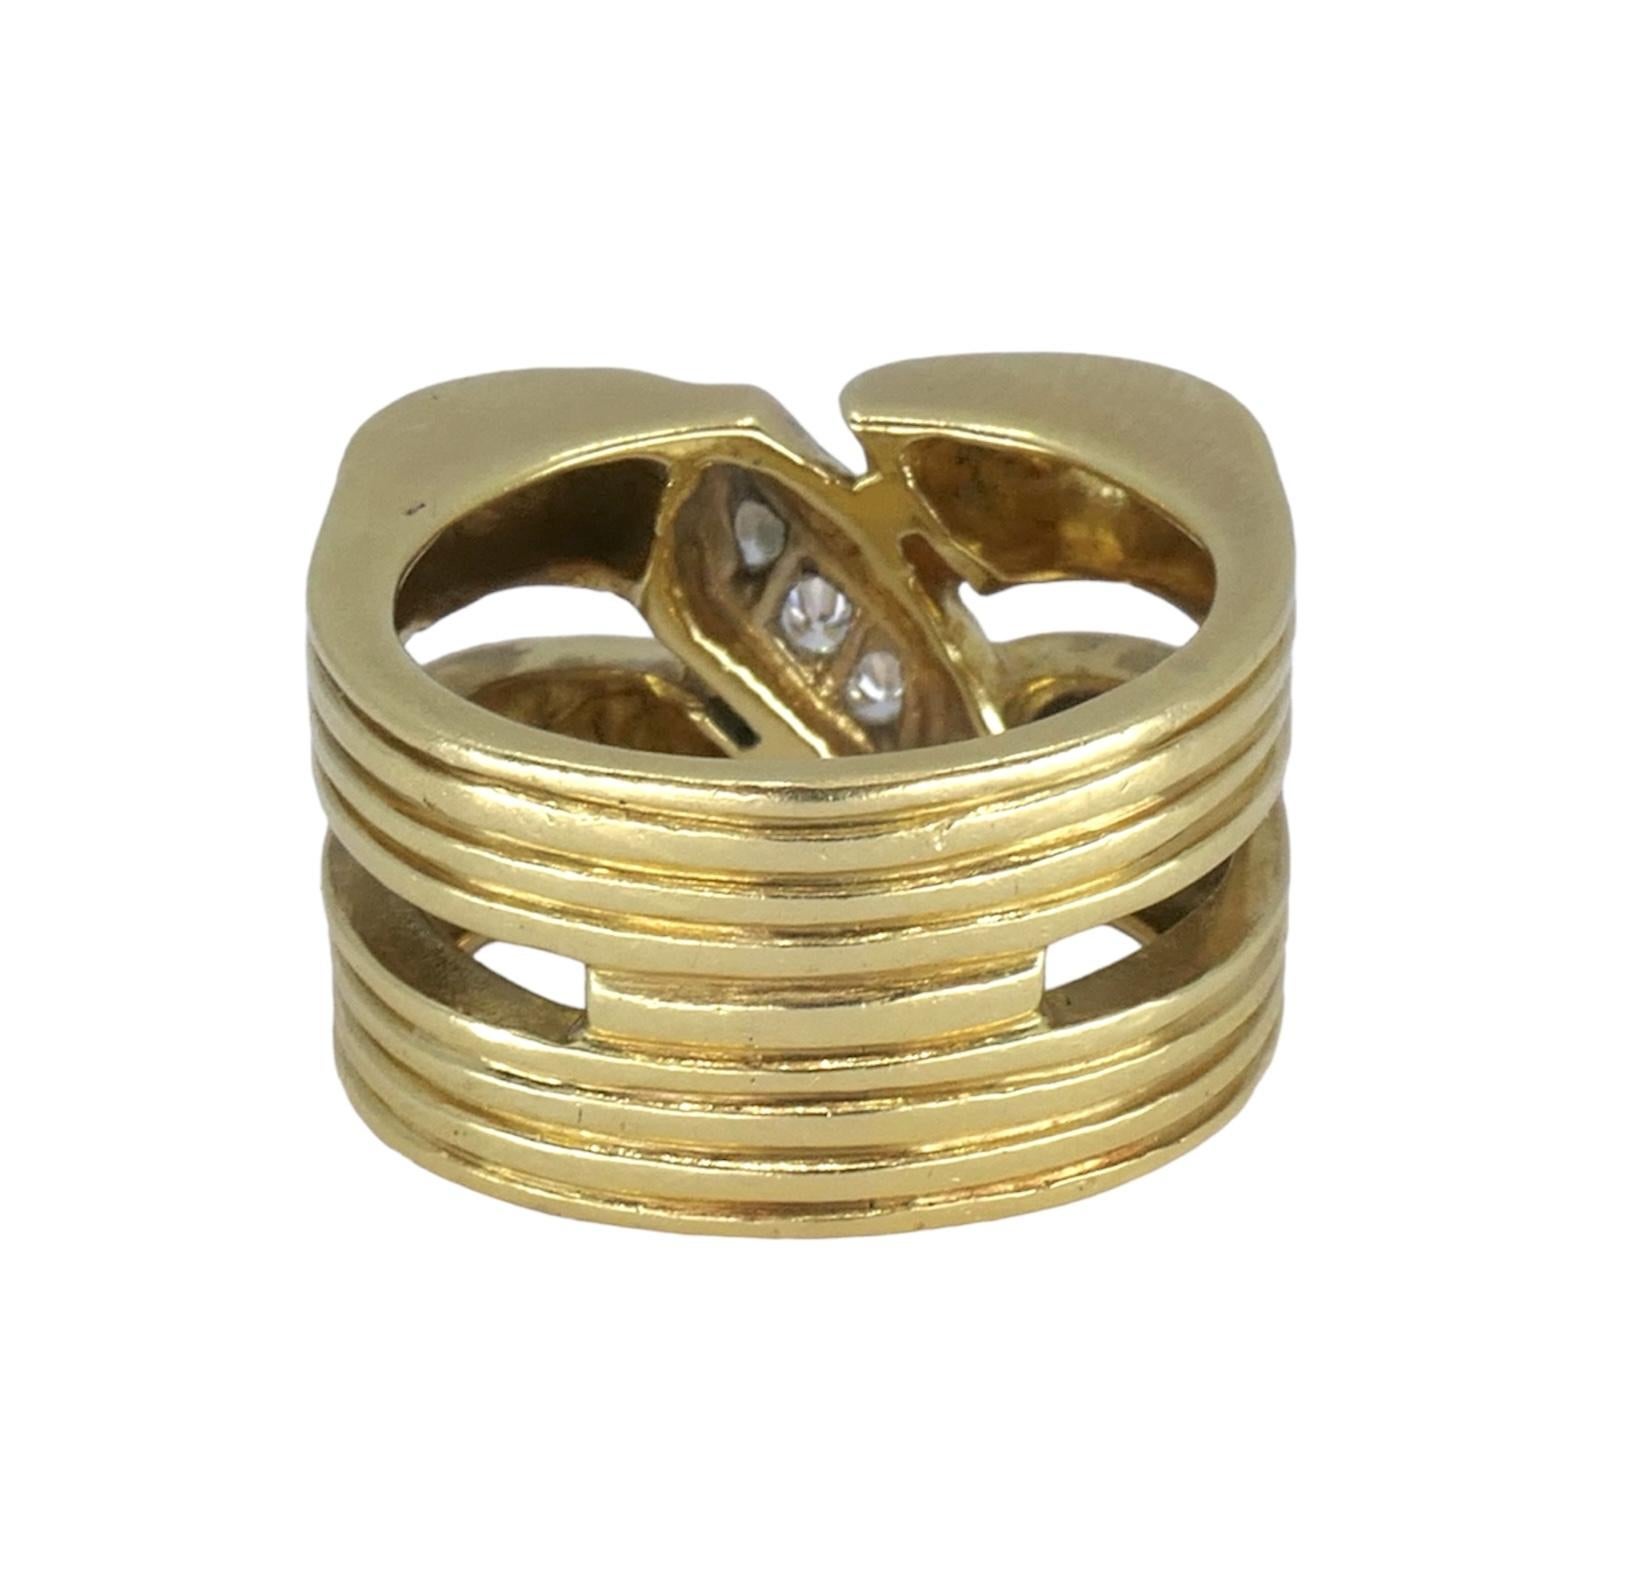 Vintage Tiffany & Co. 18k Gold Diamond Tank Ring sz 7.5 In Good Condition For Sale In Beverly Hills, CA